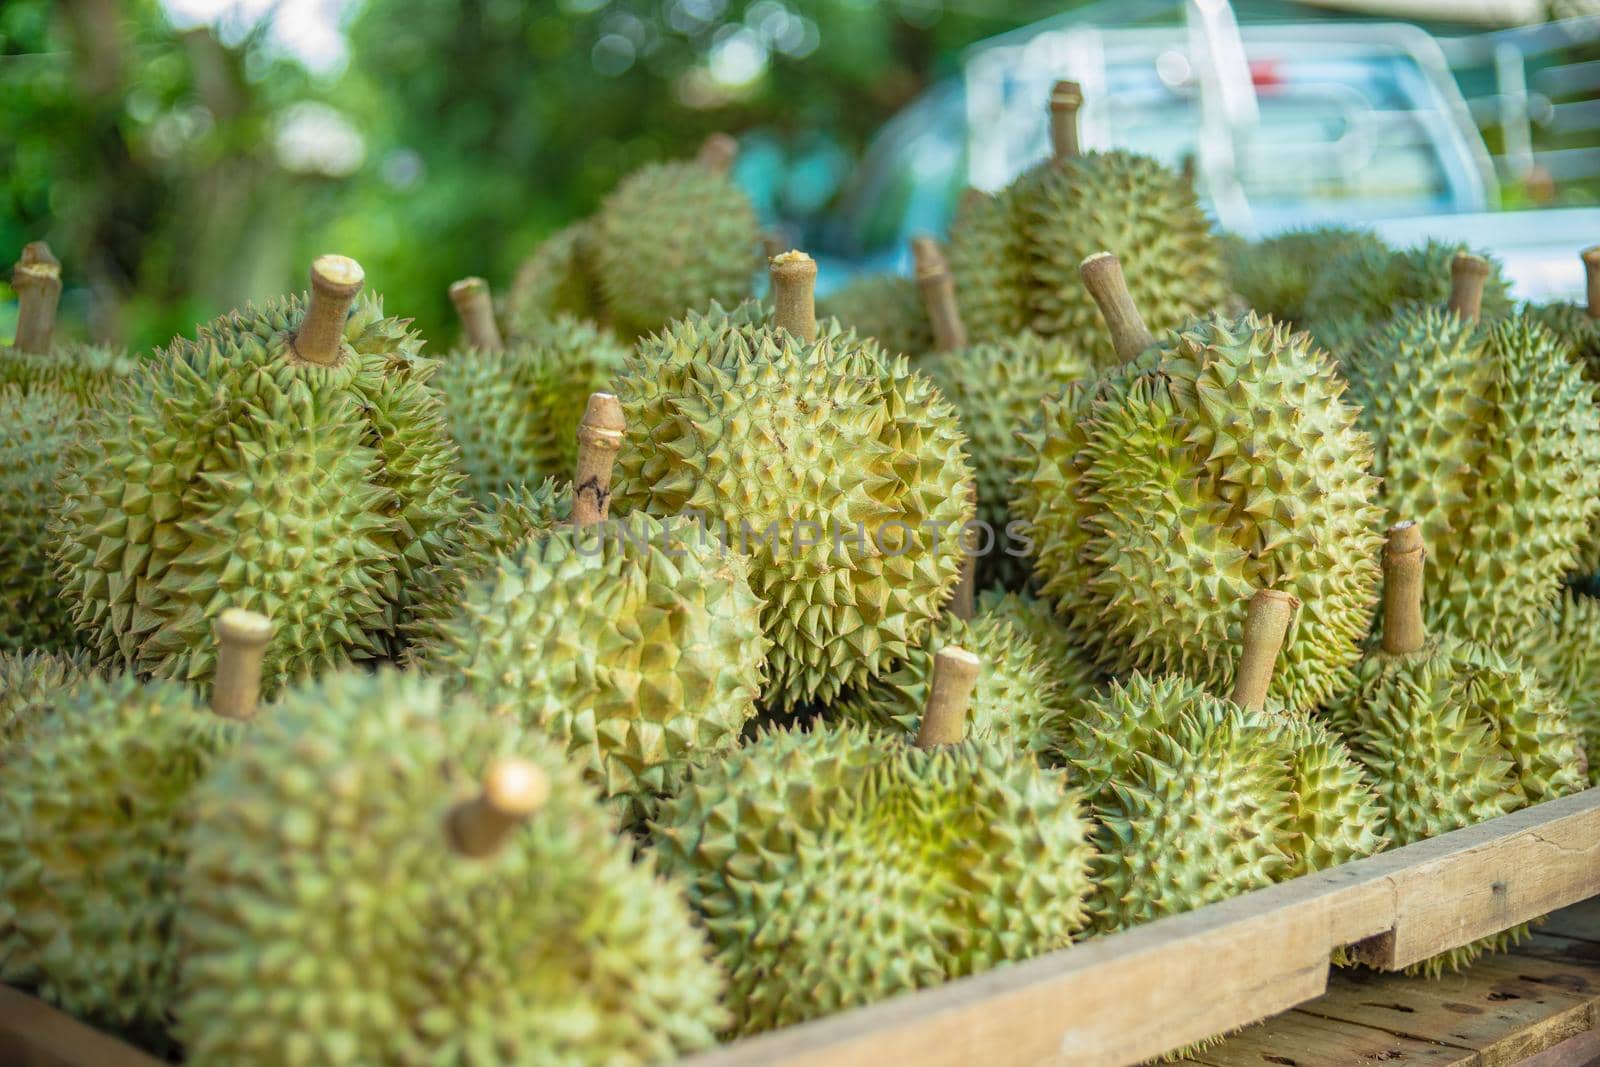 Durian has been arranged on wooden shelf to be displayed to the buyer by domonite